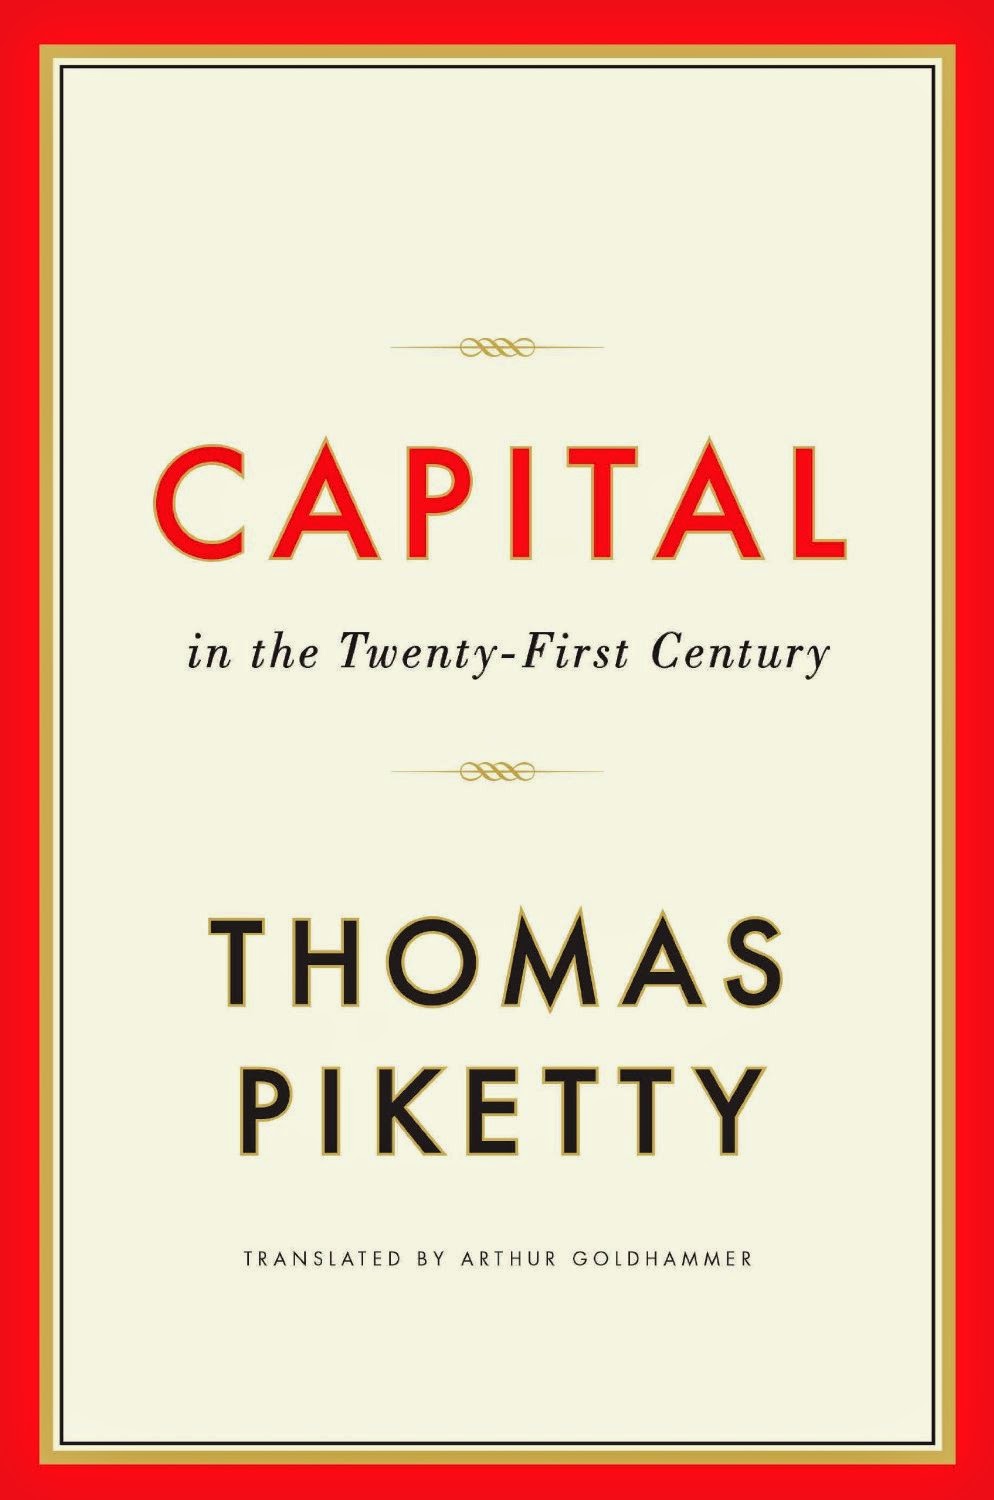 http://discover.halifaxpubliclibraries.ca/?q=title:capital%20in%20the%20twenty-first%20century